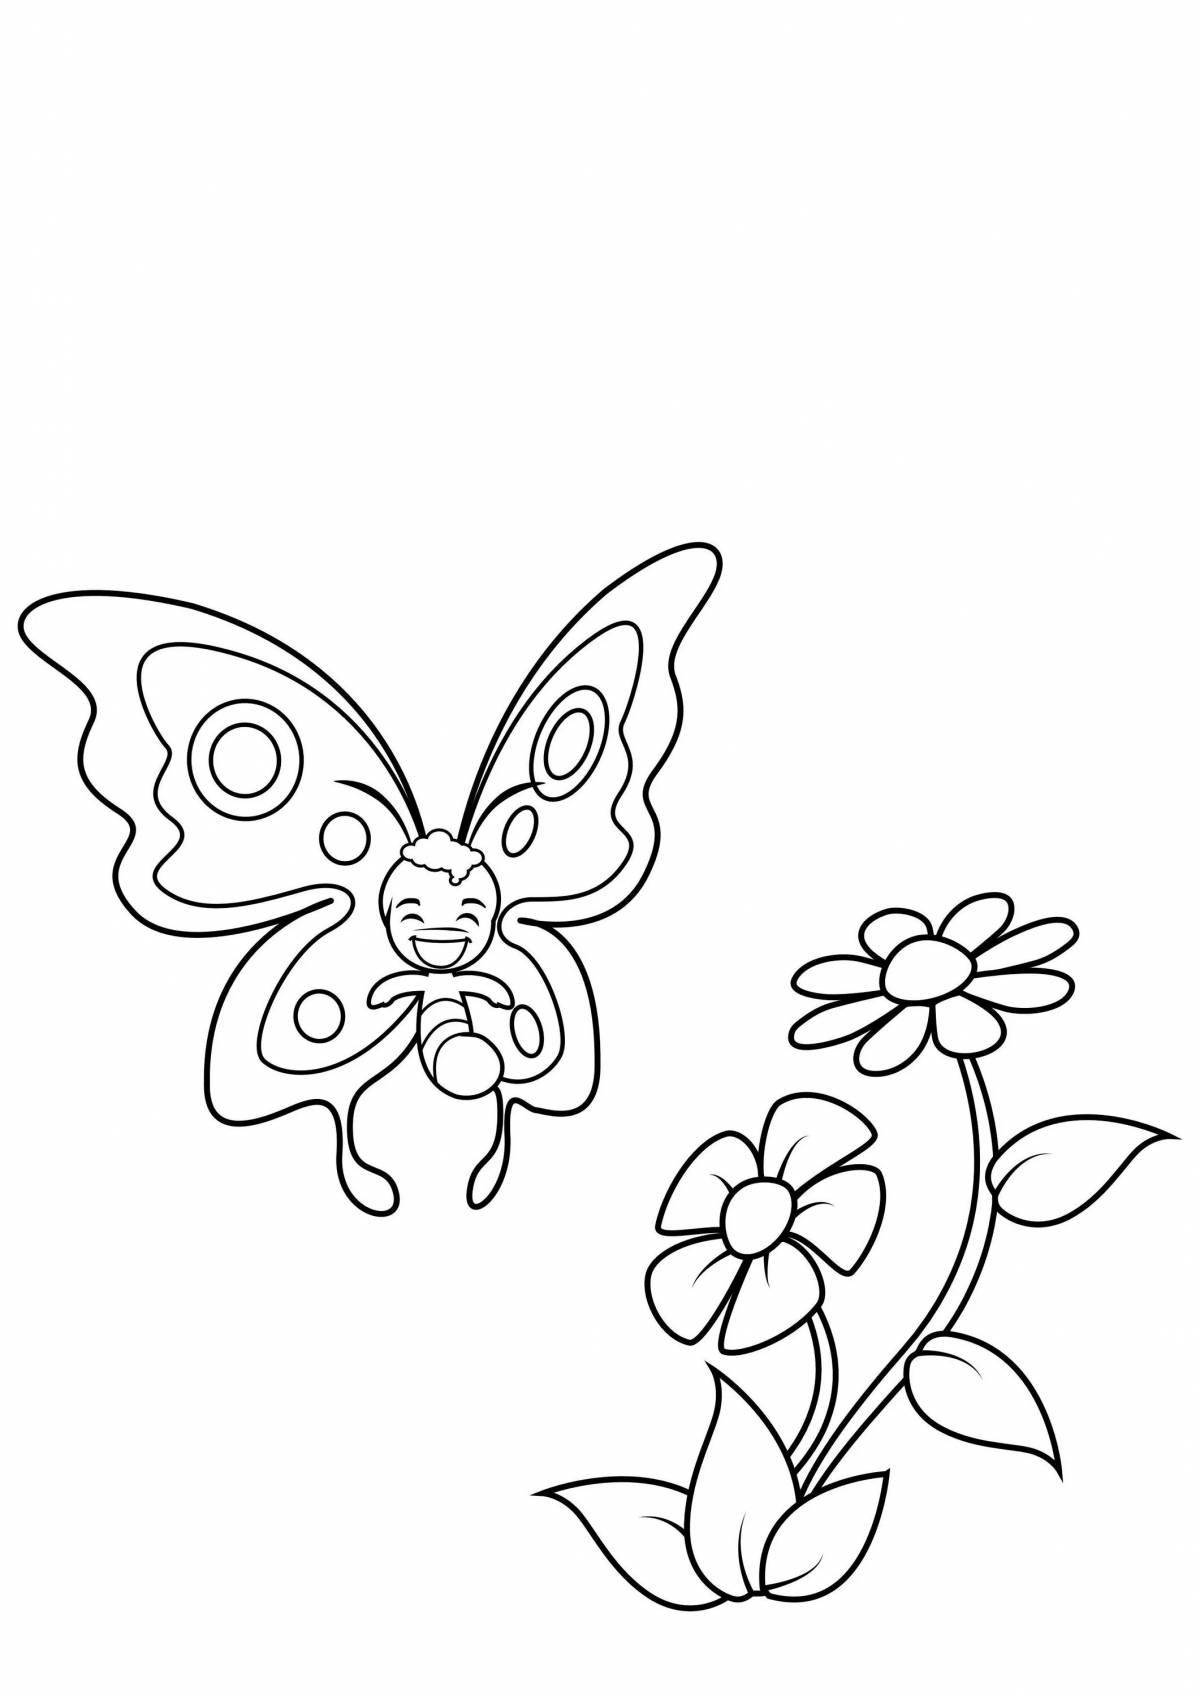 Brightly colored butterfly with flower coloring book